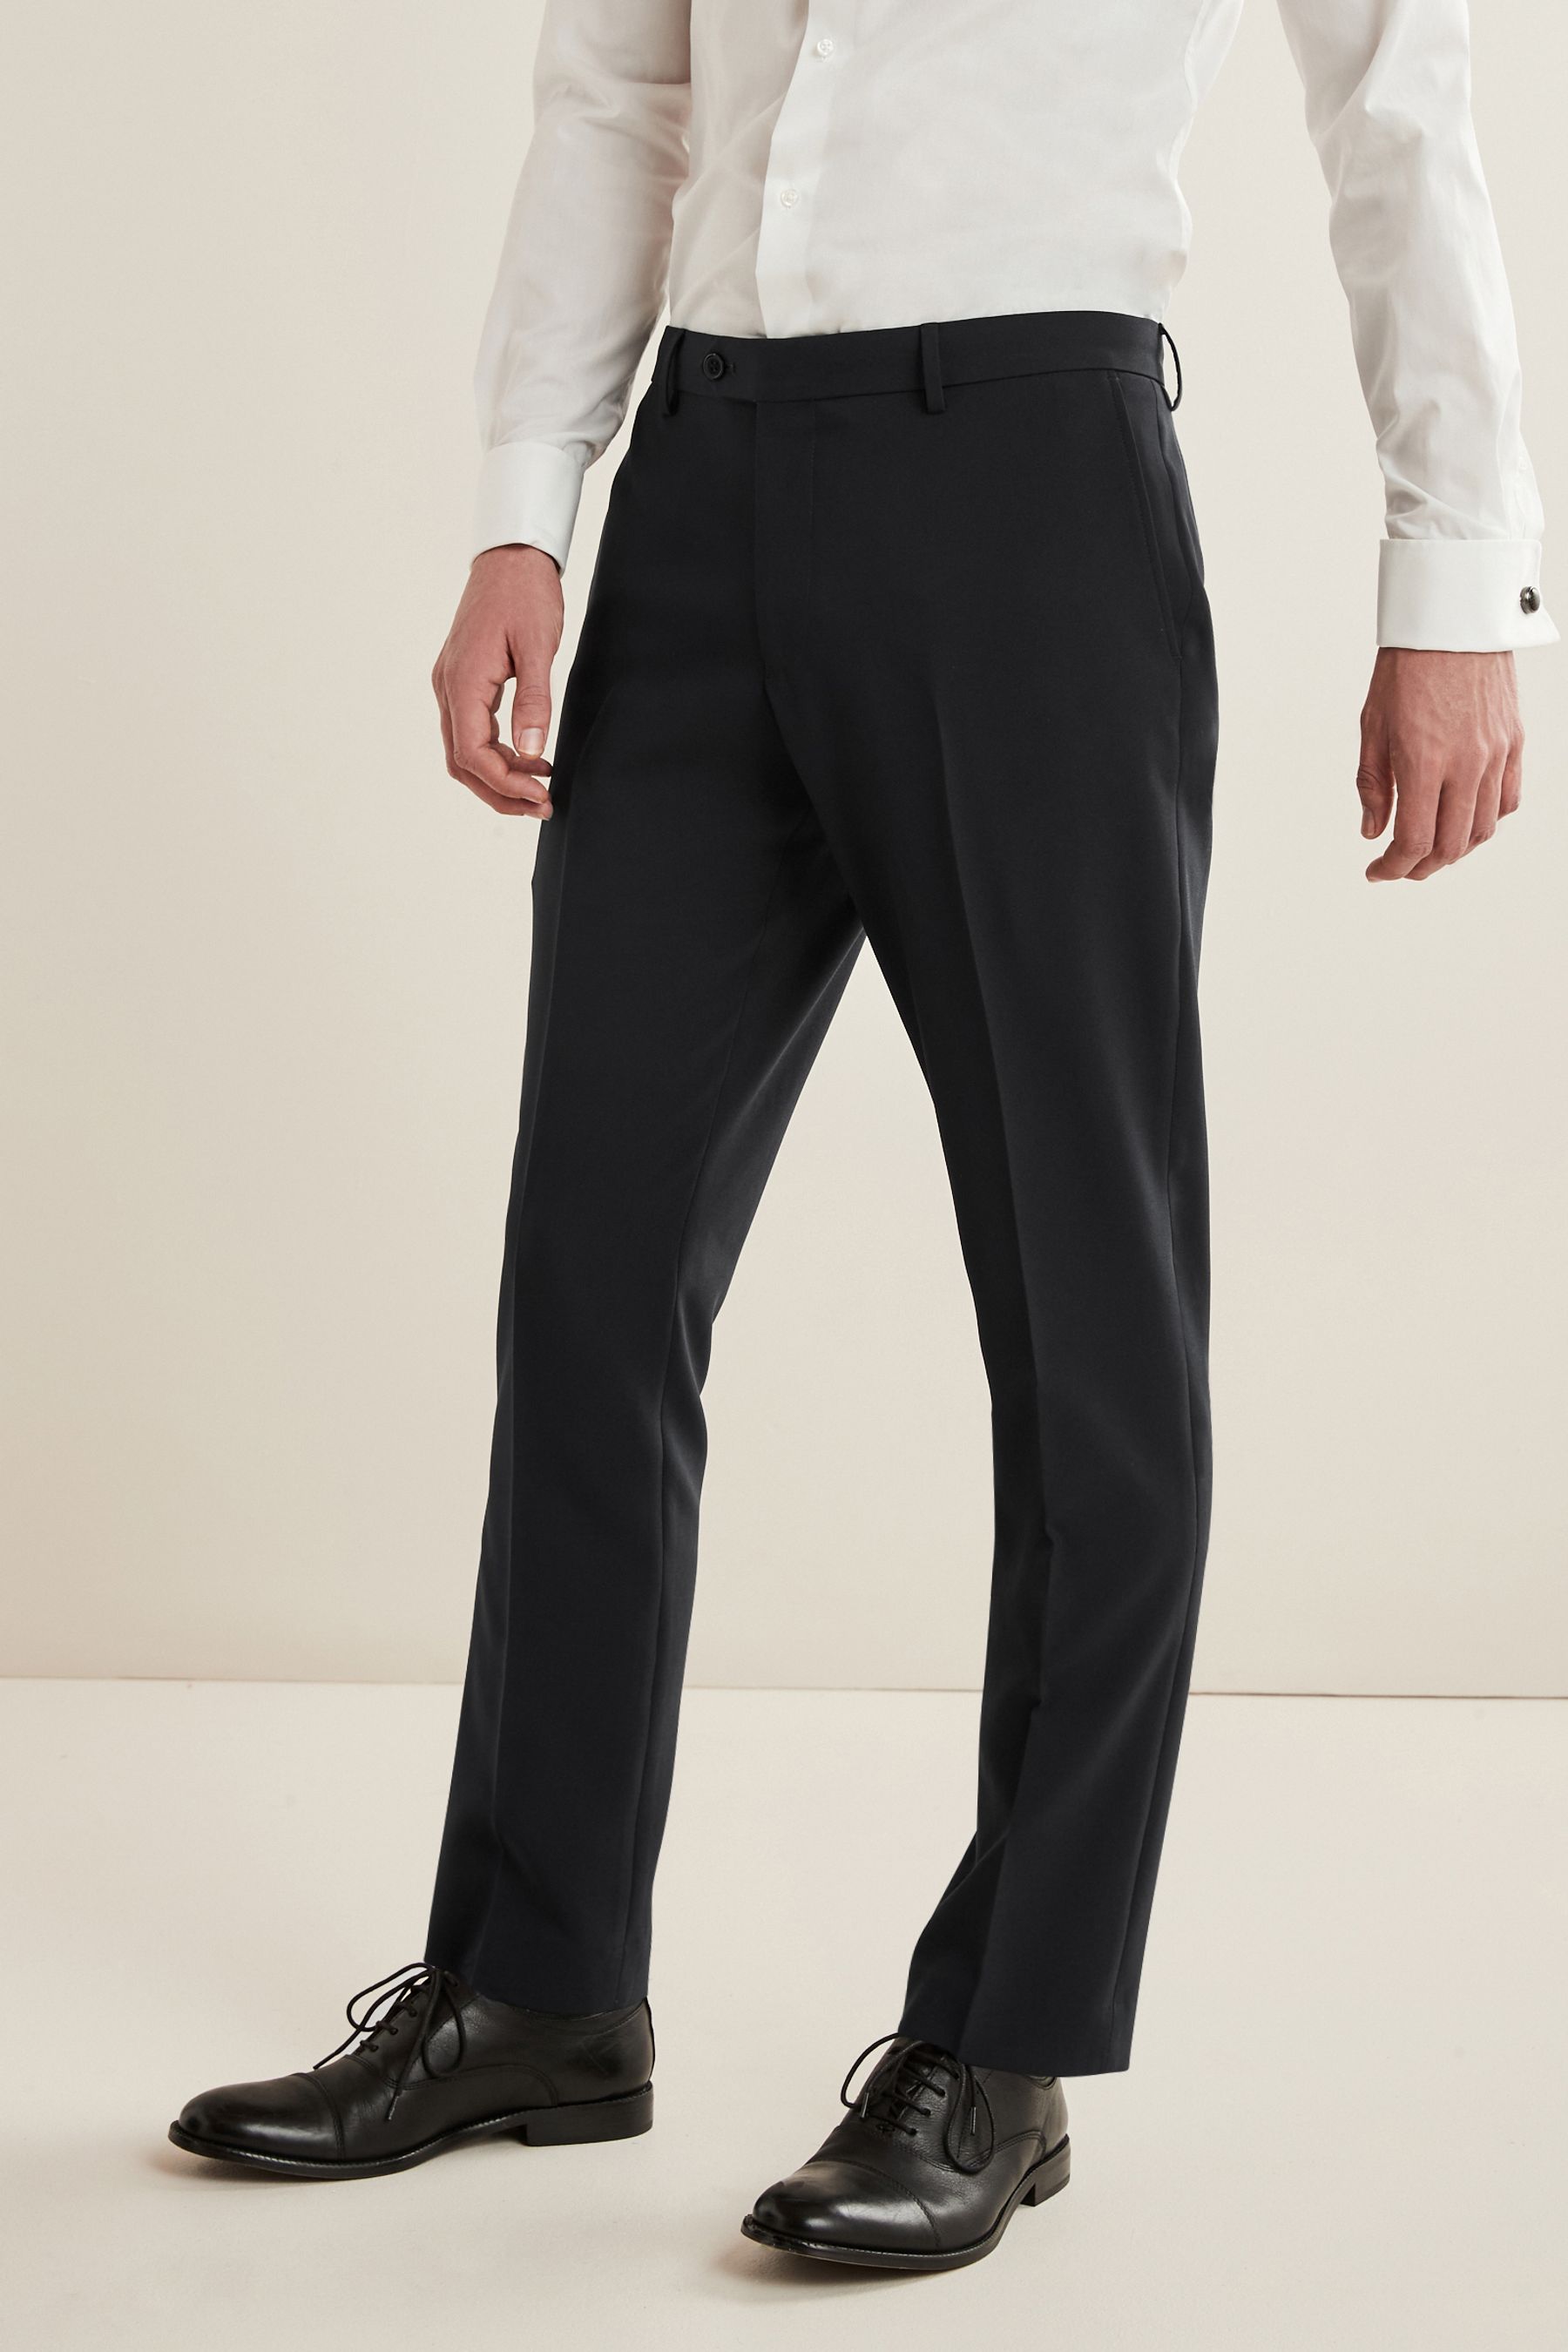 Buy Black Slim Essential Suit: Trousers from the Next UK online shop